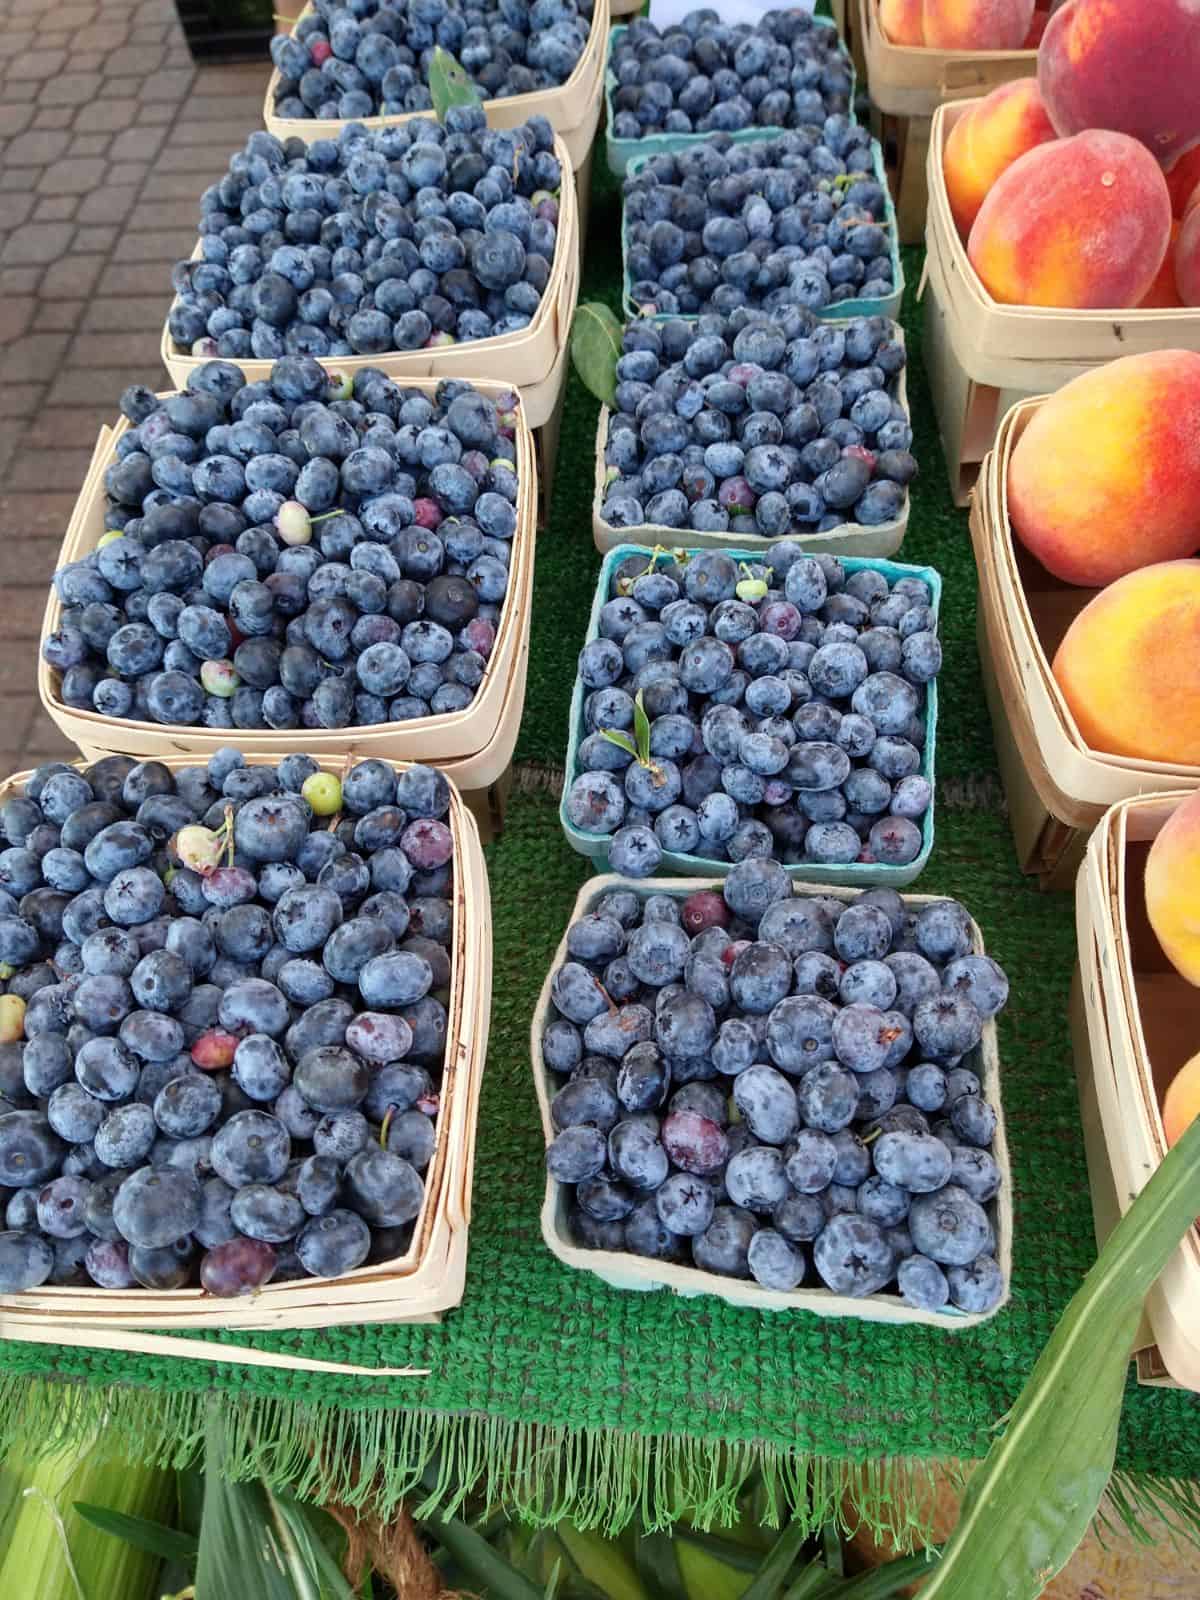 Containers of Liberty Blueberries on a table at a farmer's market in Michigan.